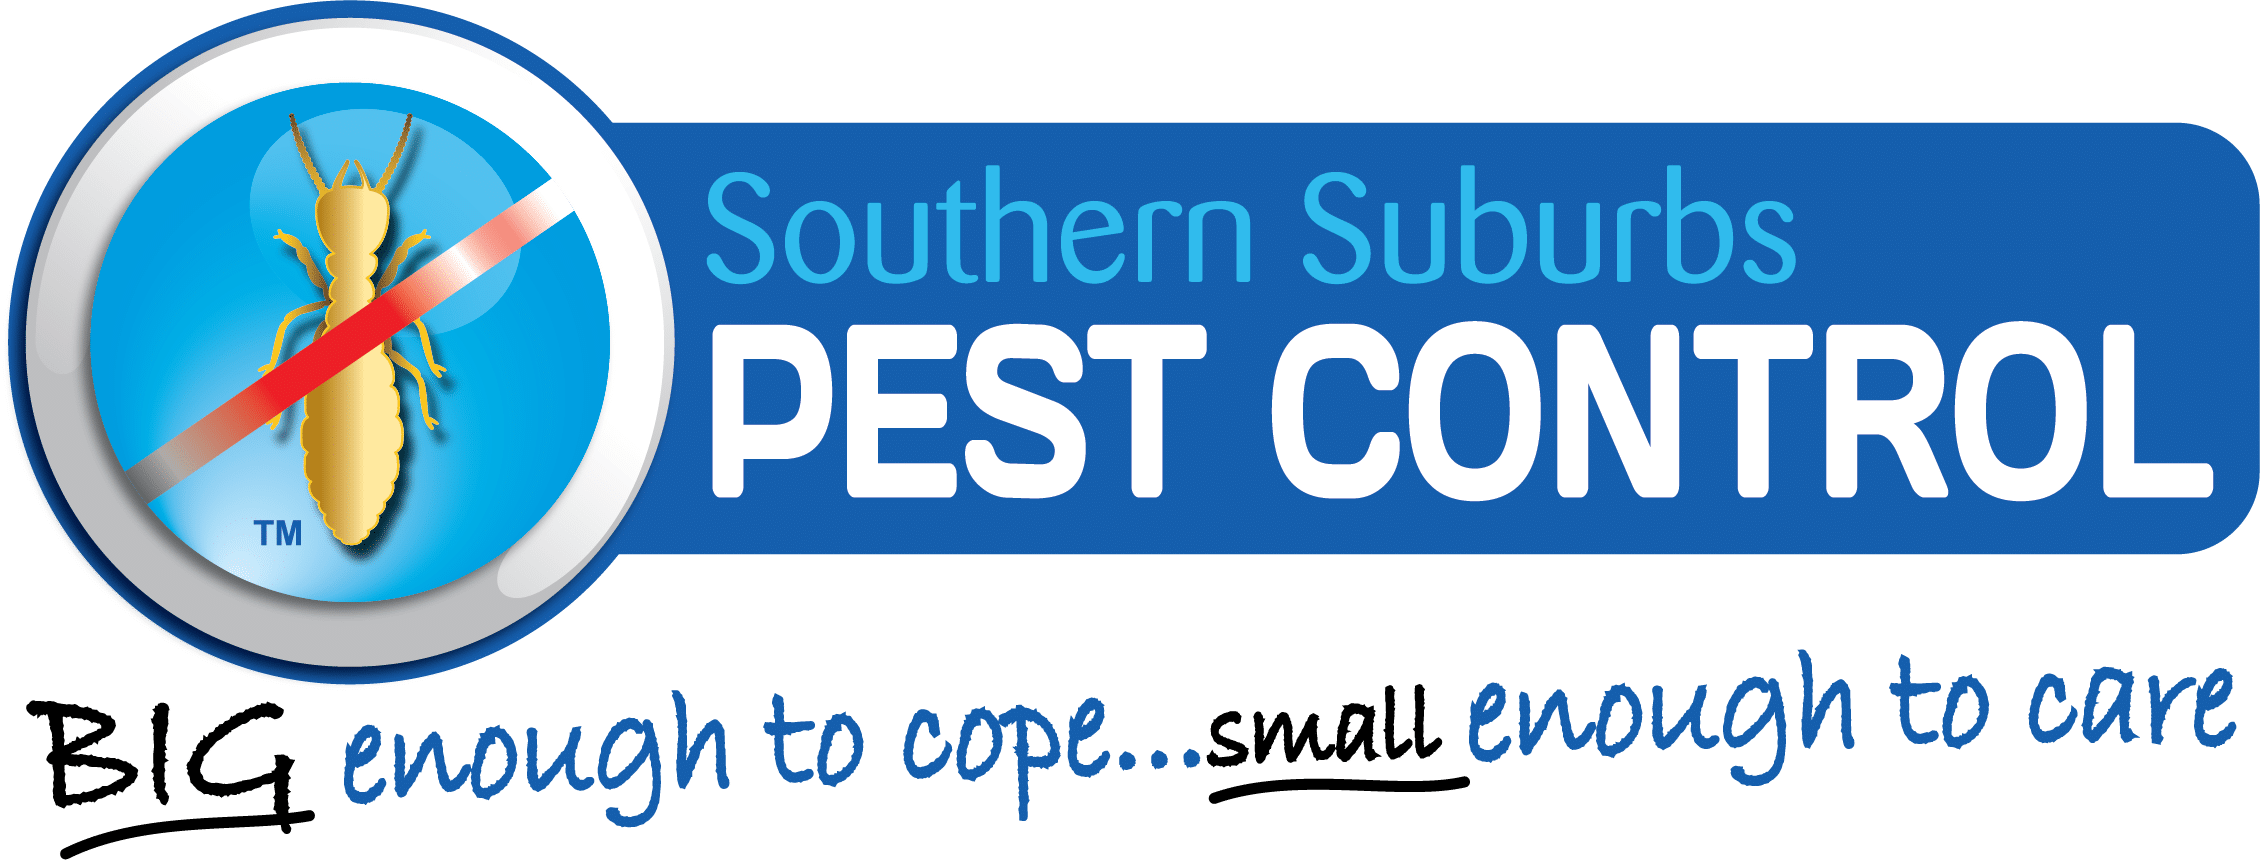 Possum Removal Adelaide Hills | Possum Removal Cost Adelaide | Southern Suburbs Pest Control